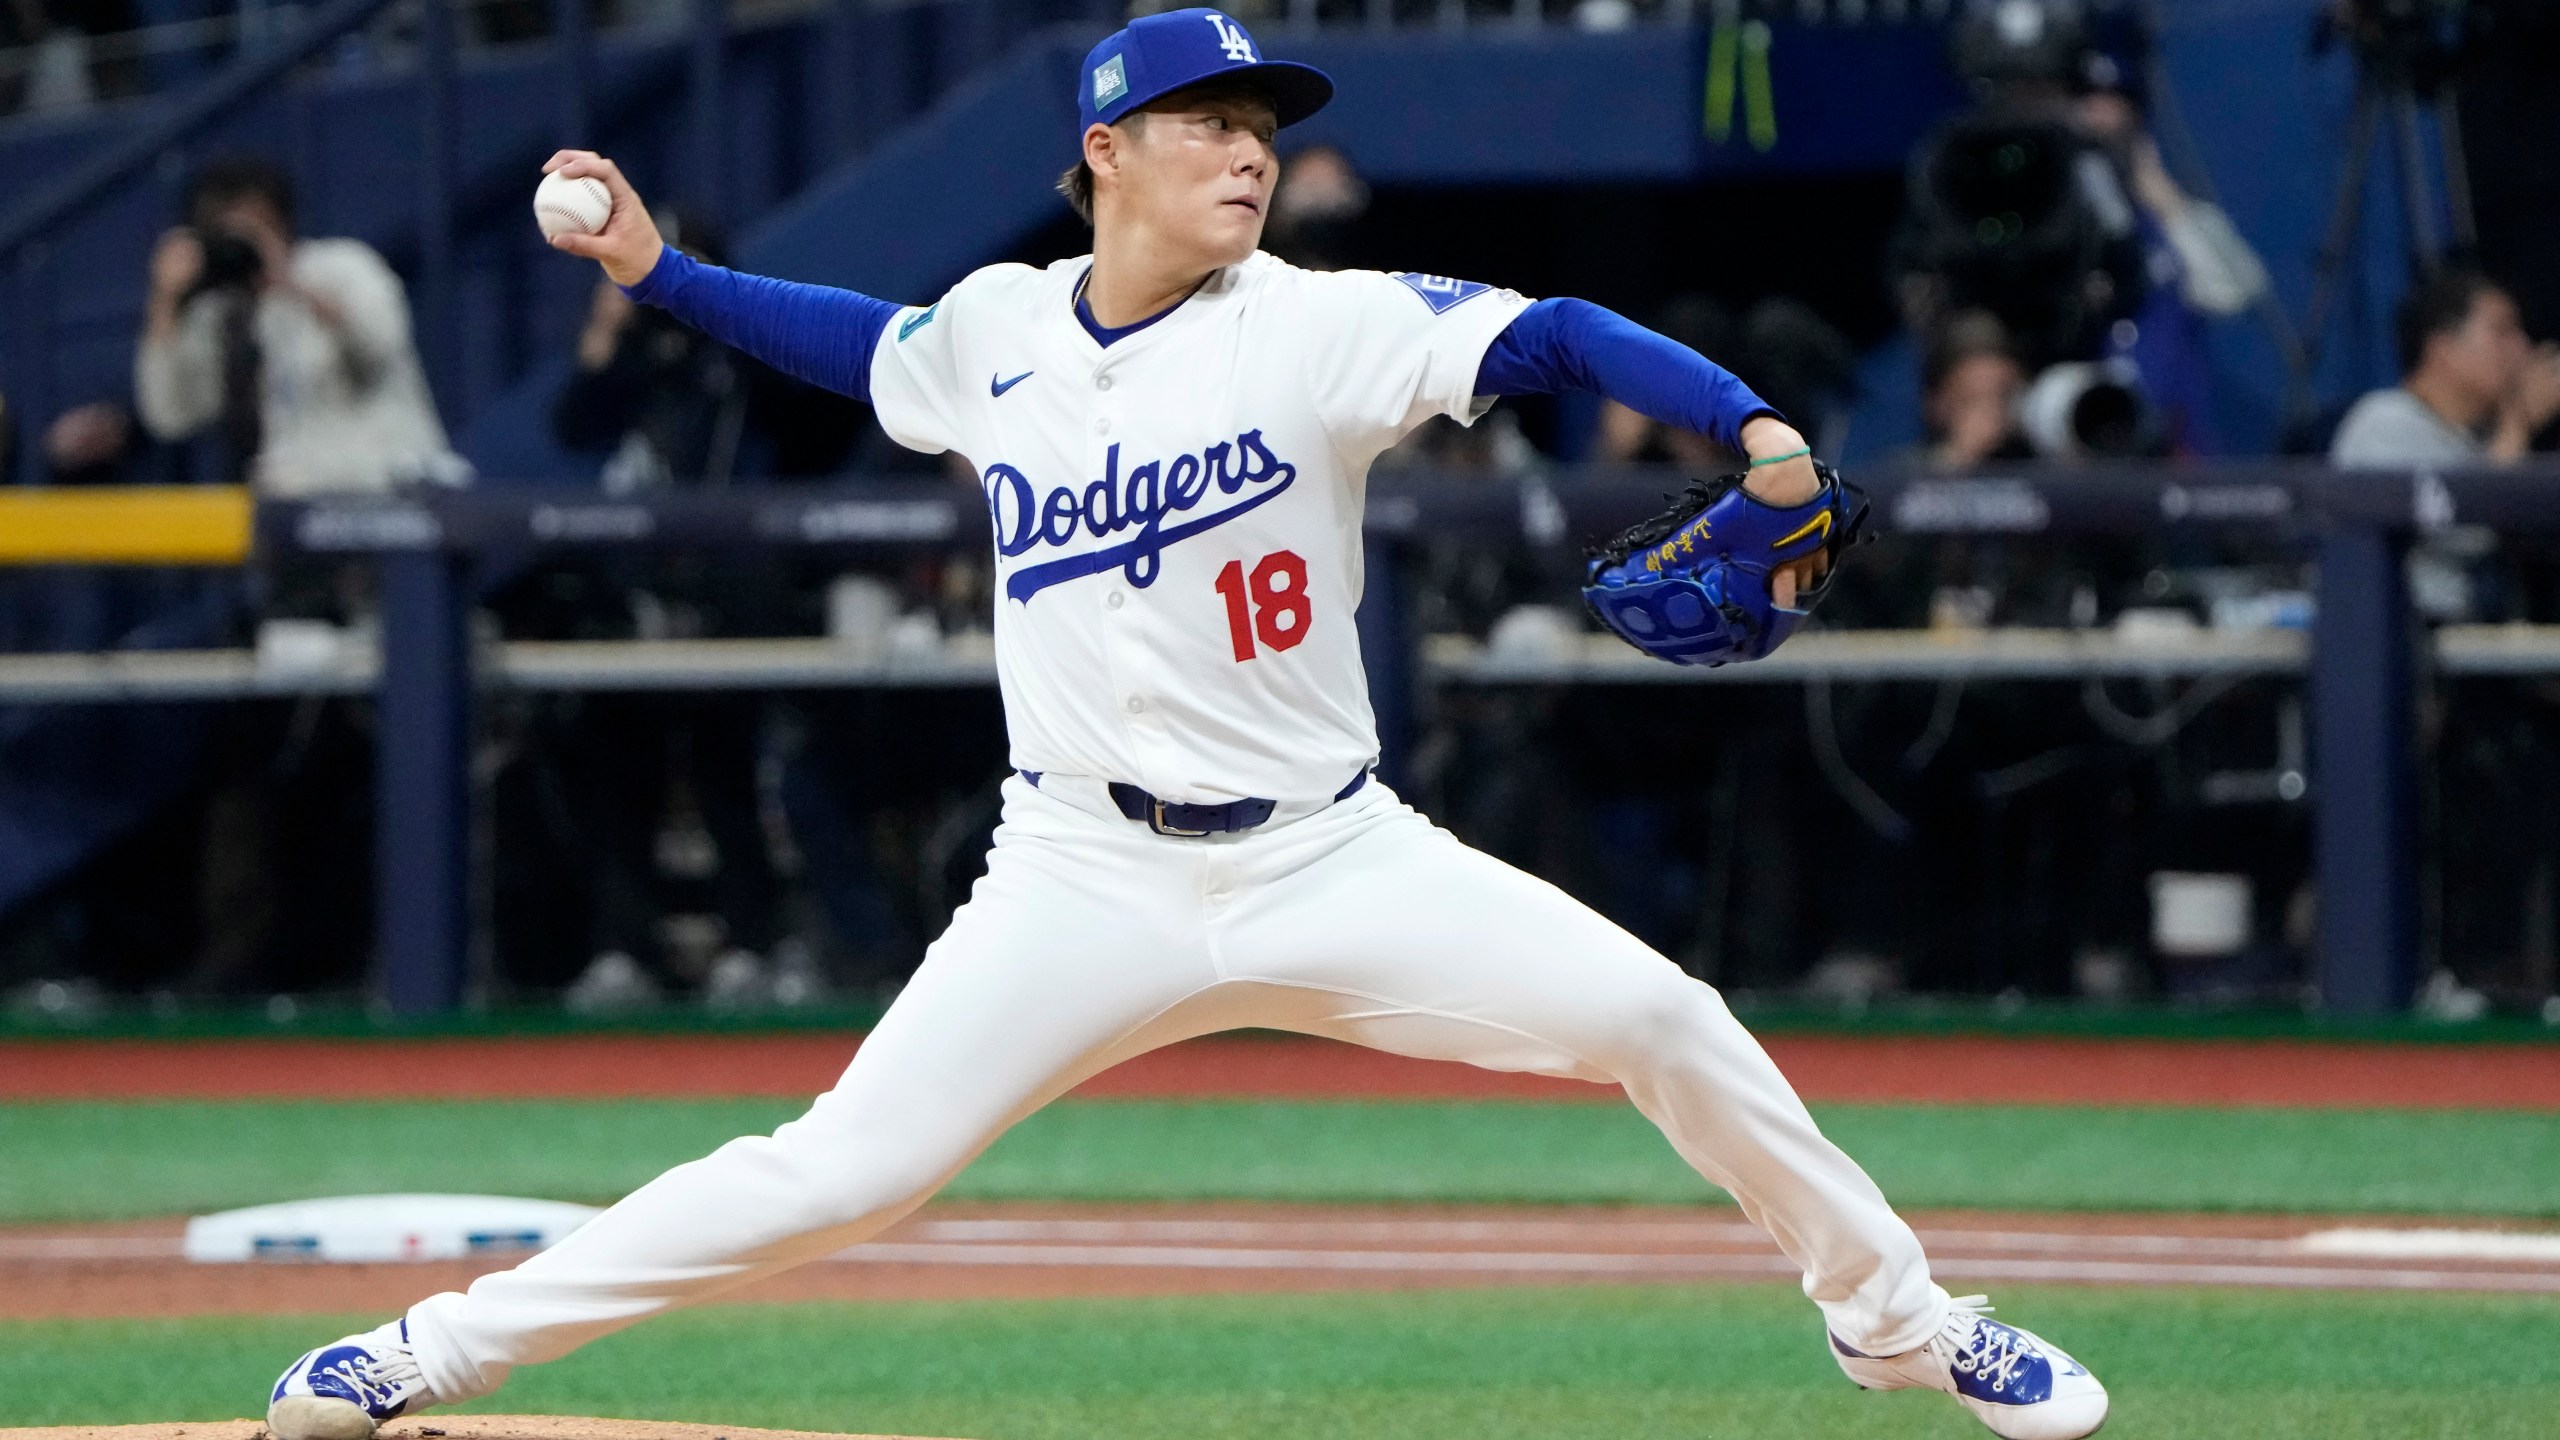 Los Angeles Dodgers starting pitcher Yoshinobu Yamamoto throws to the plate during the first inning of a baseball game against the San Diego Padres at the Gocheok Sky Dome in Seoul, South Korea Thursday, March 21, 2024, in Seoul, South Korea. (AP Photo/Ahn Young-joon)